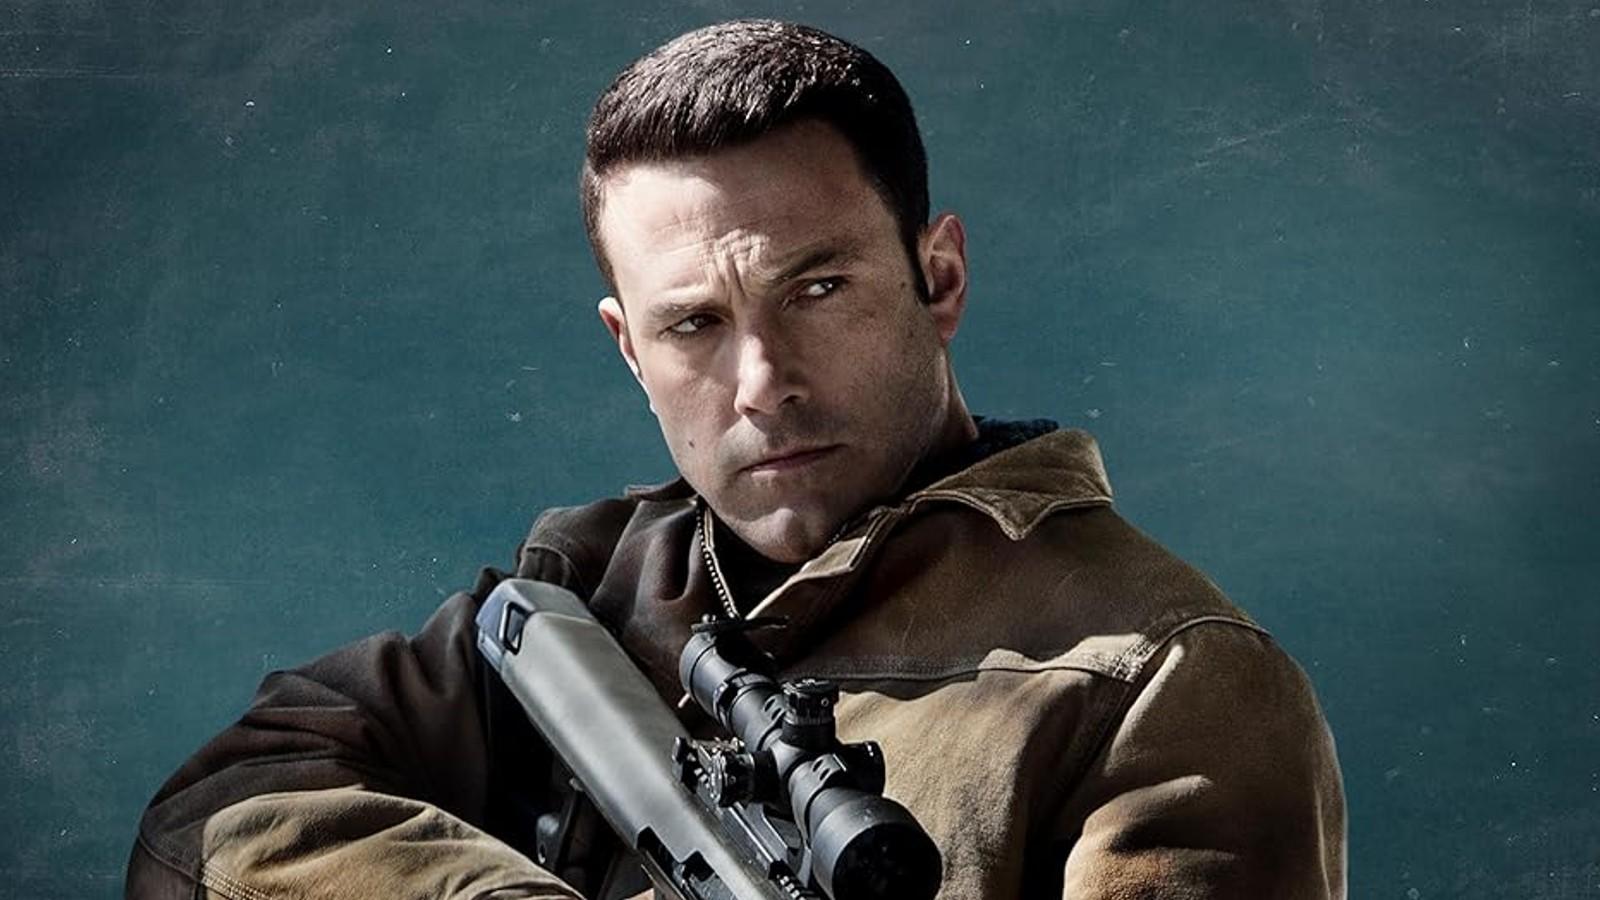 Ben Affleck on the poster for The Accountant